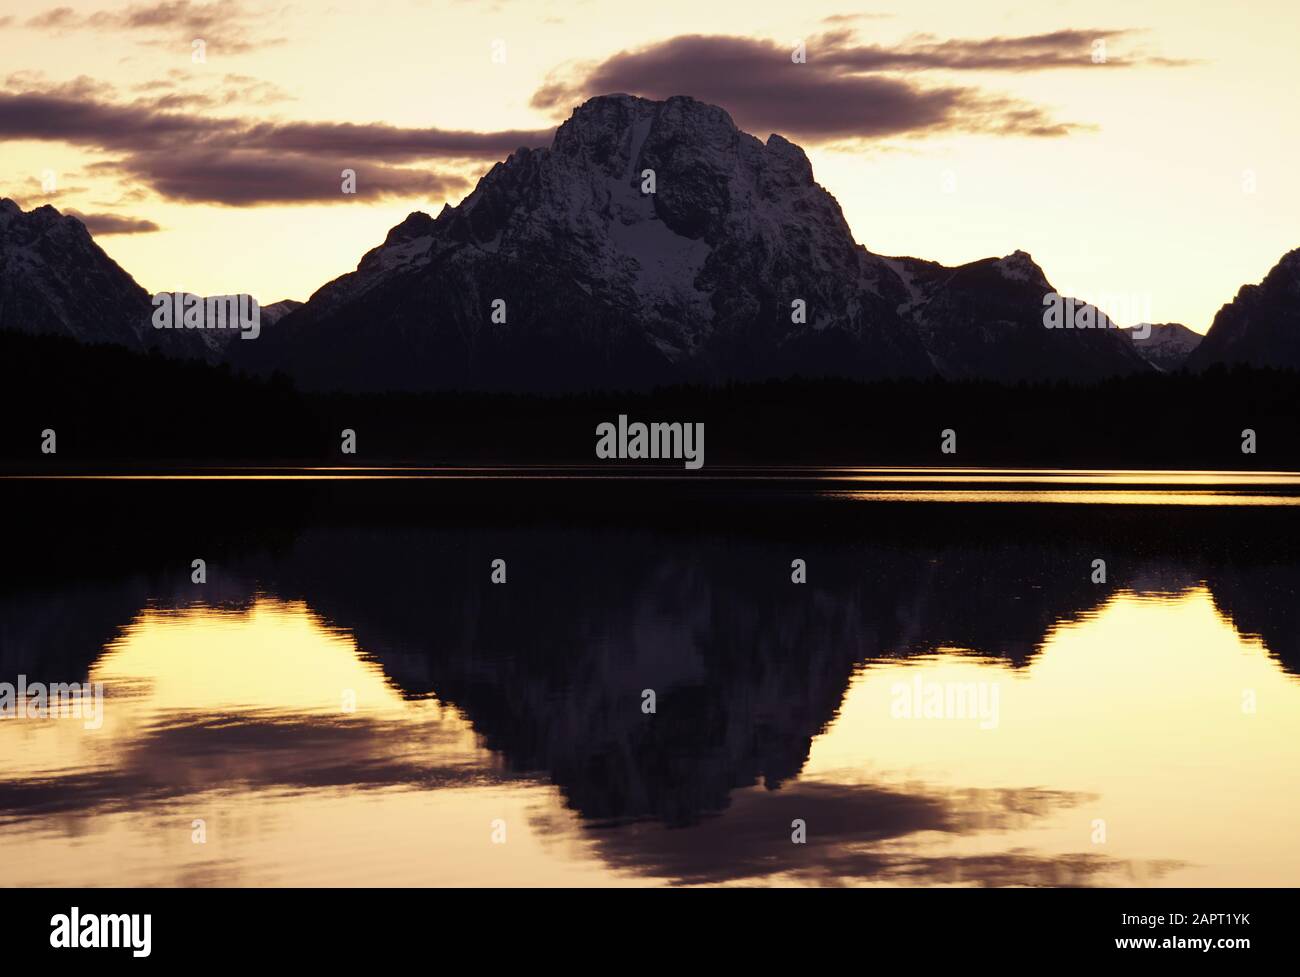 The still lake perfectly reflects the mountain in the background in the waning light after sunset. Stock Photo